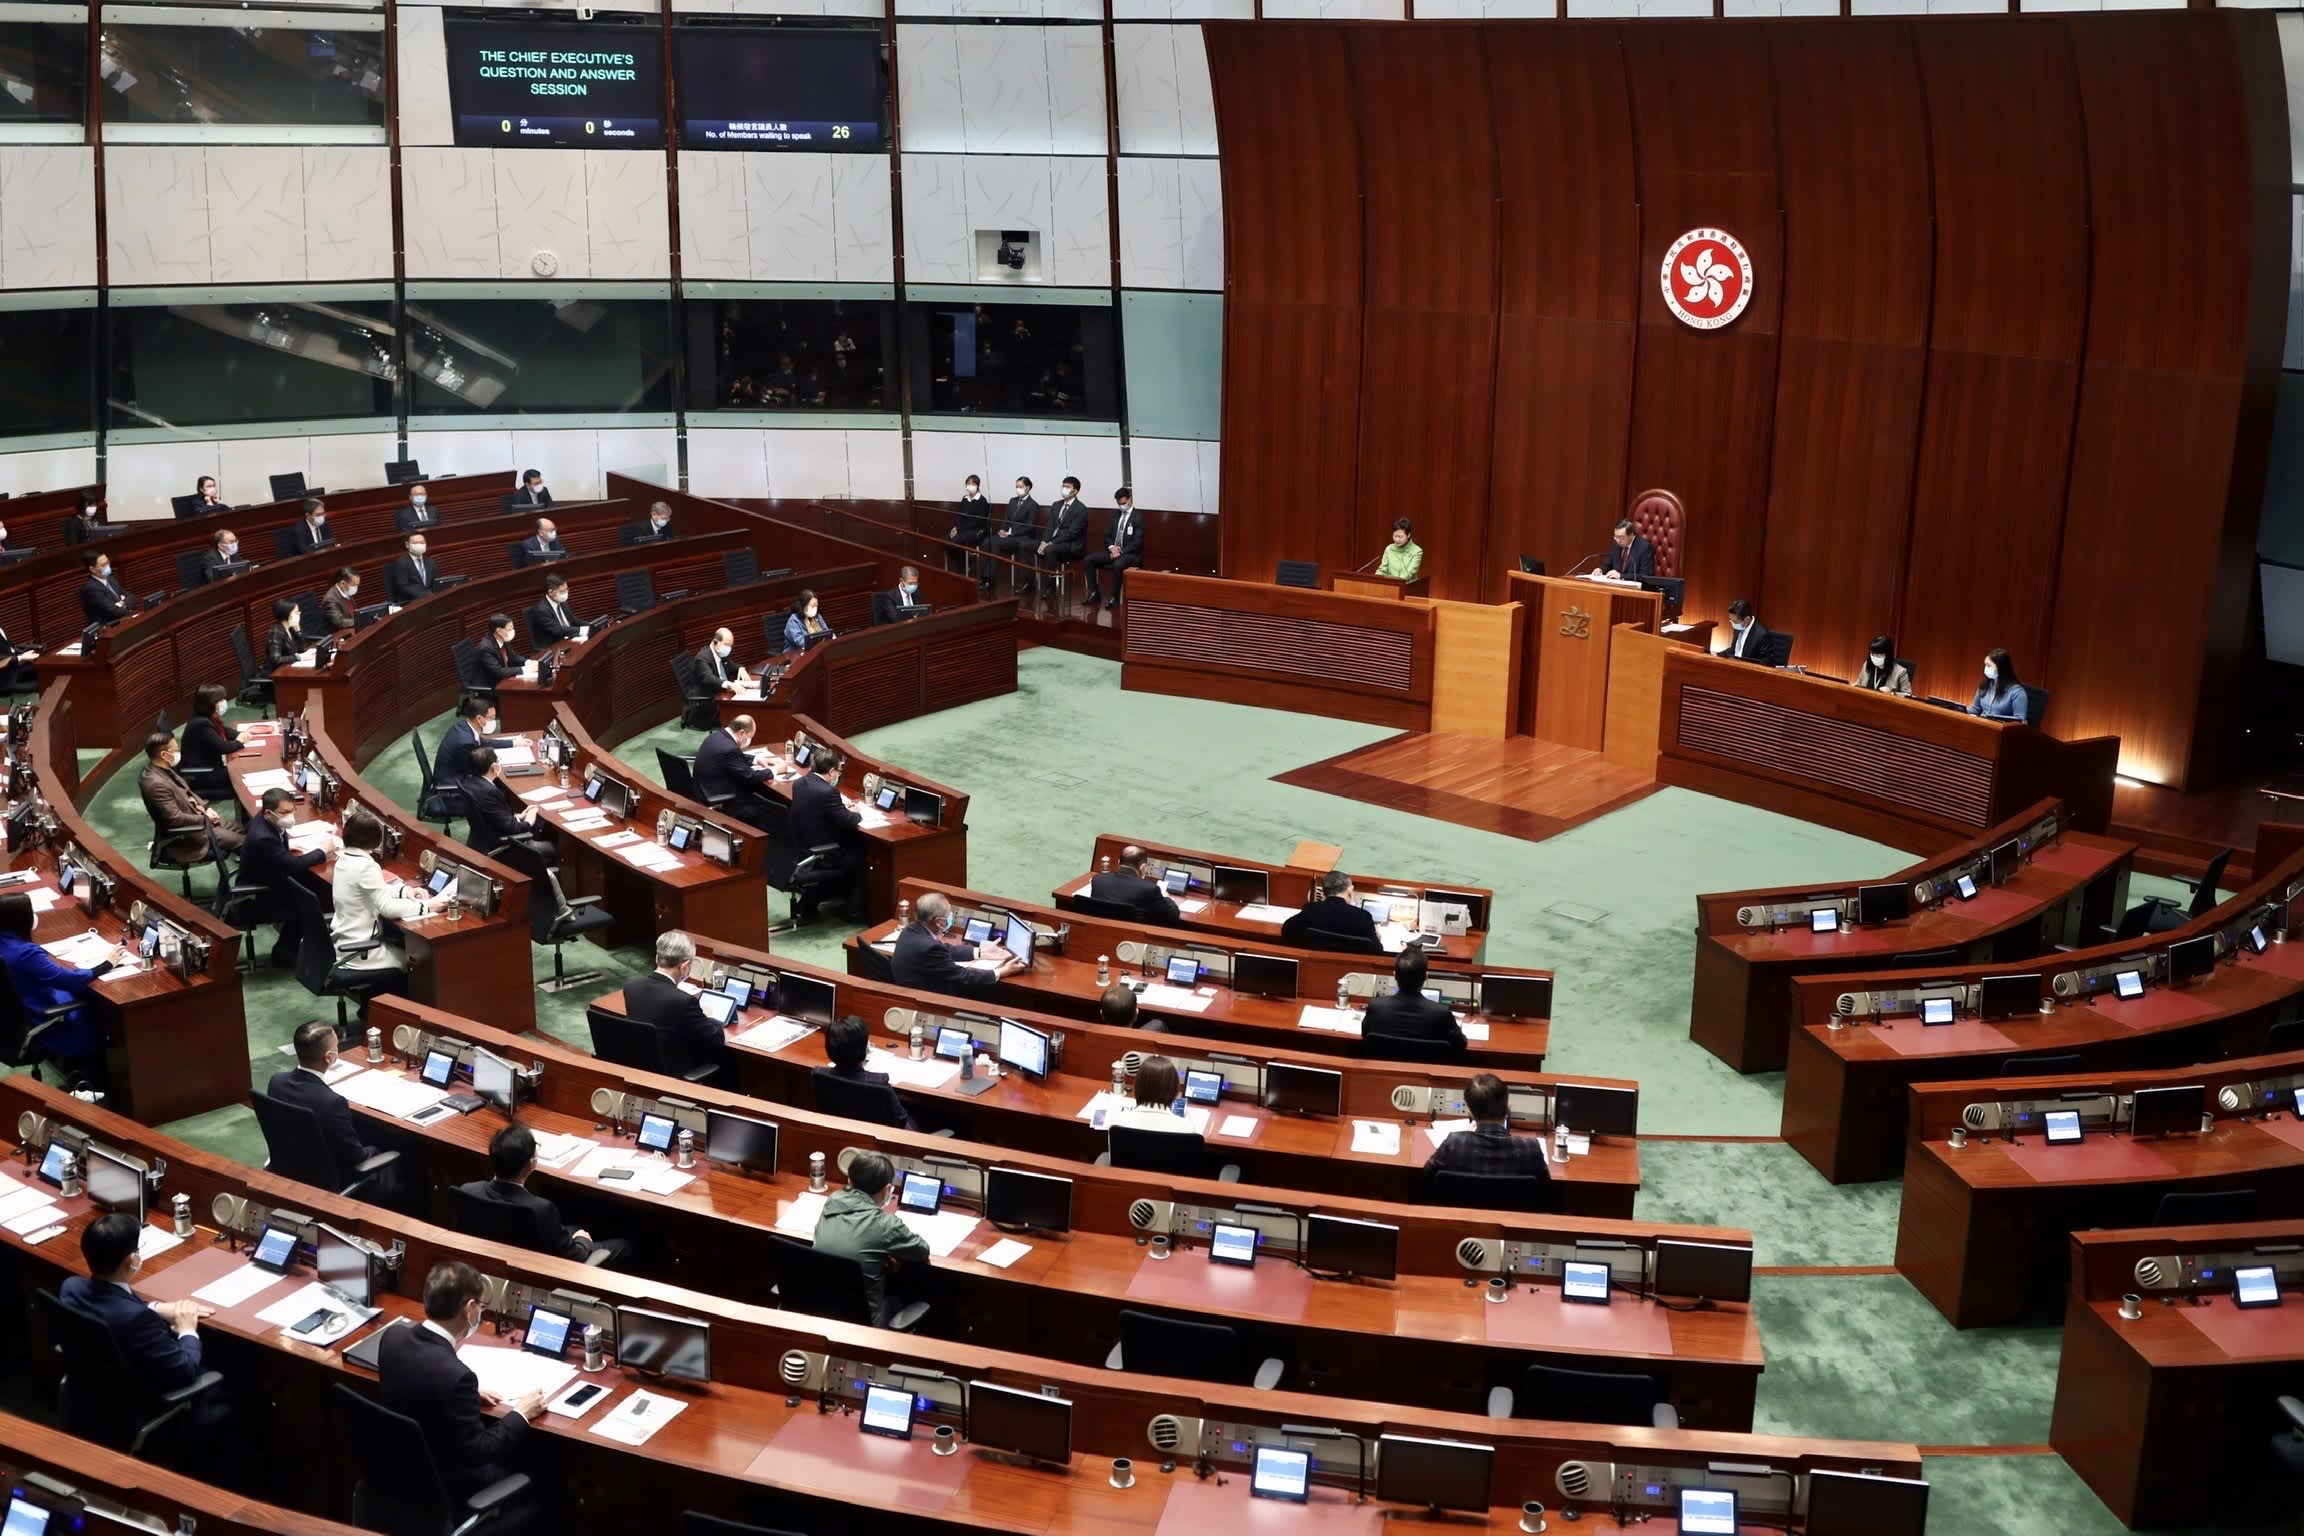 The Hong Kong legislature will be largely ceremonial after China’s overhaul: ex-US diplomat